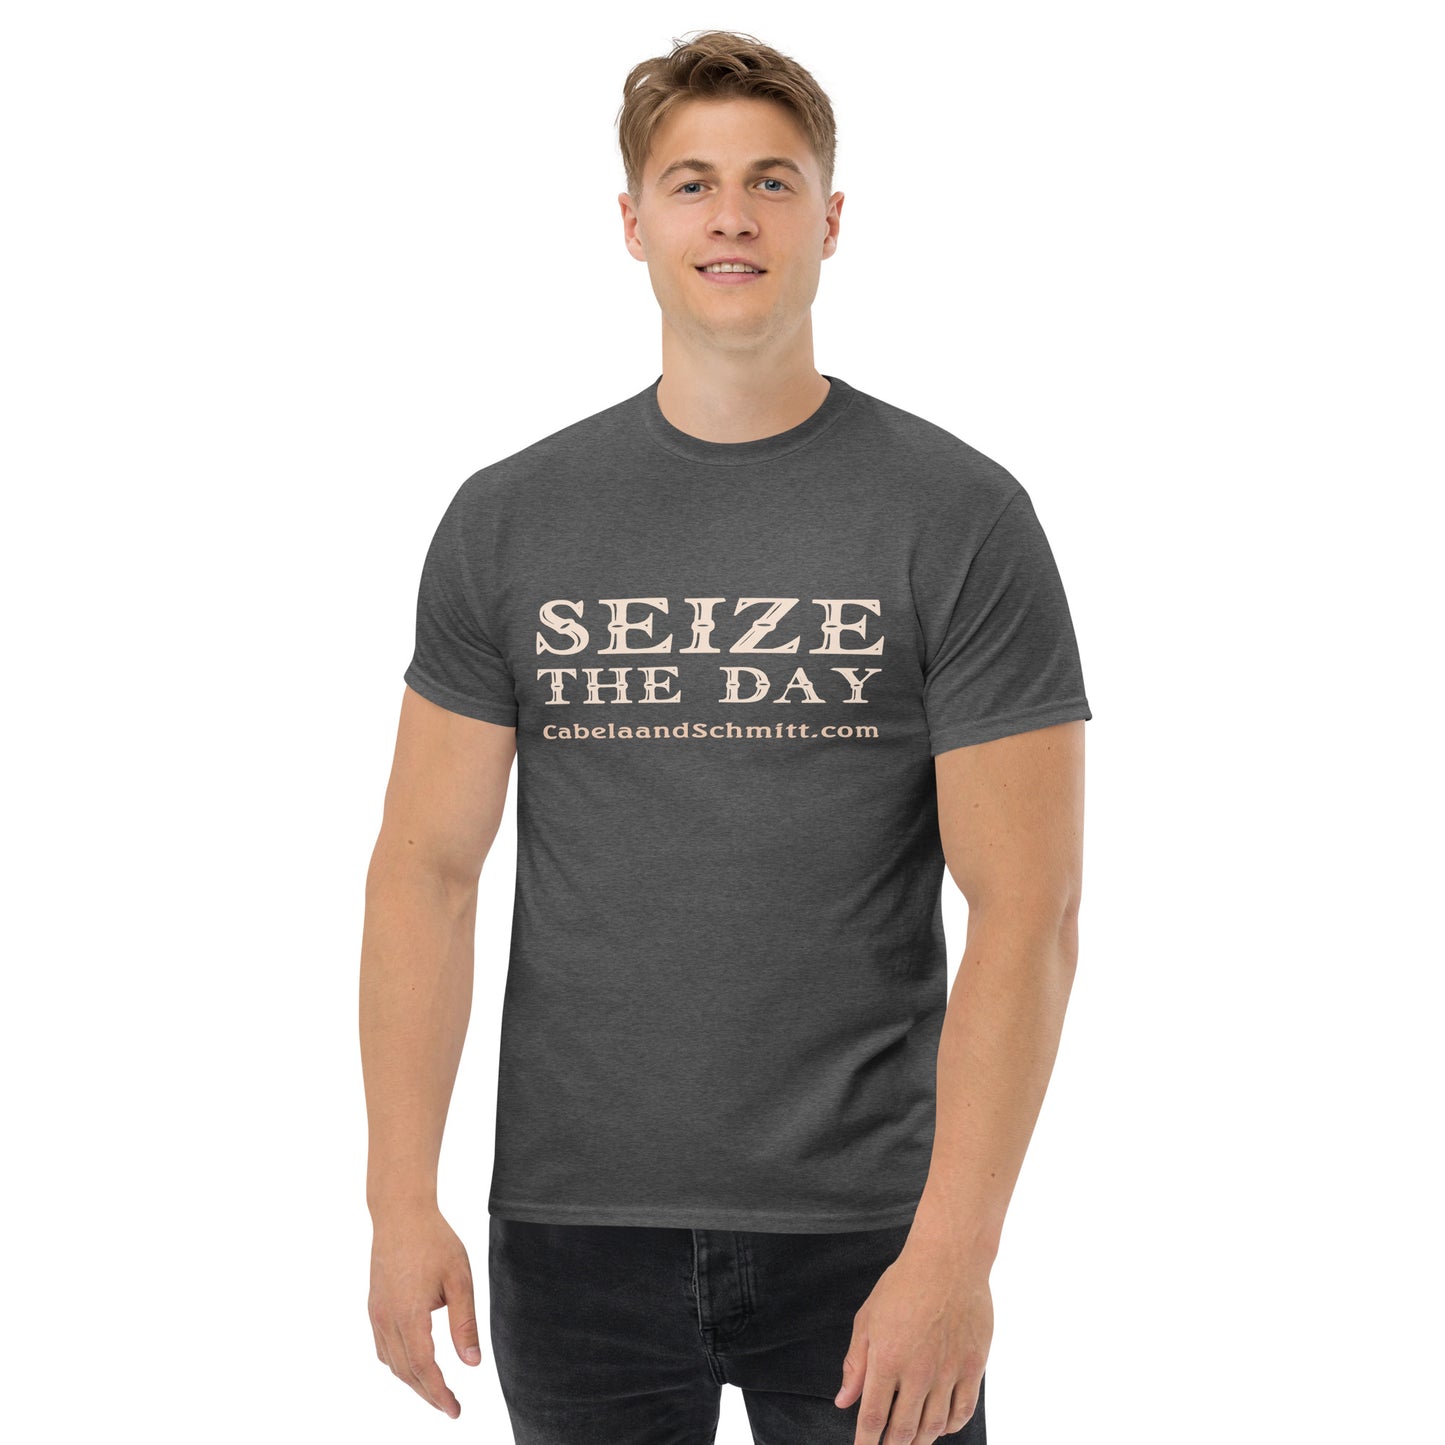 "Seize the Day" Men's classic tee